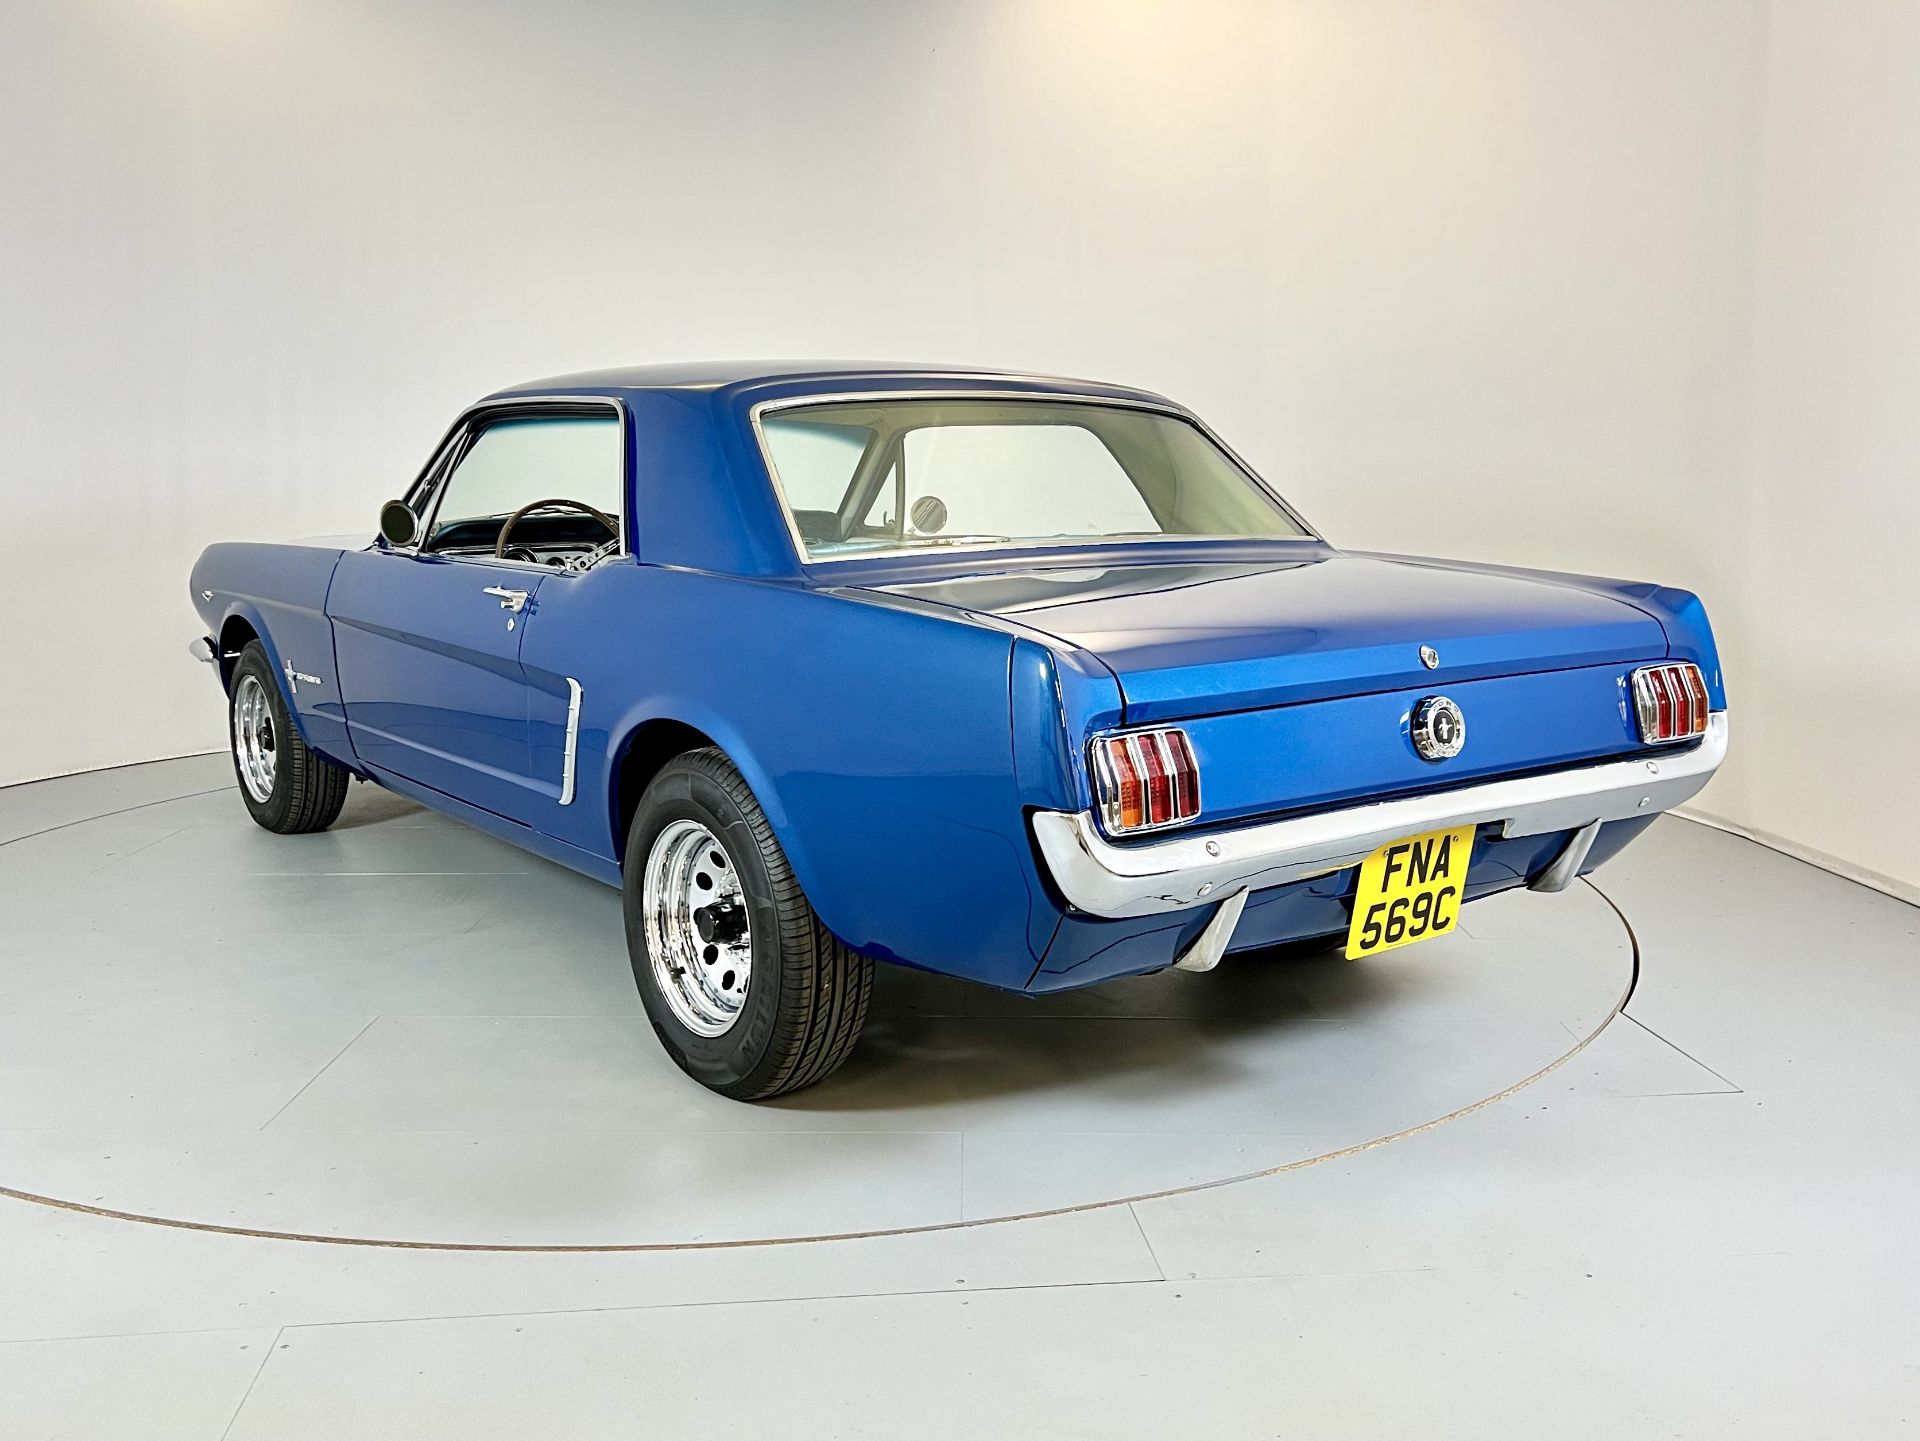 Ford Mustang 289 Coupe 'A Code' - Image 6 of 29